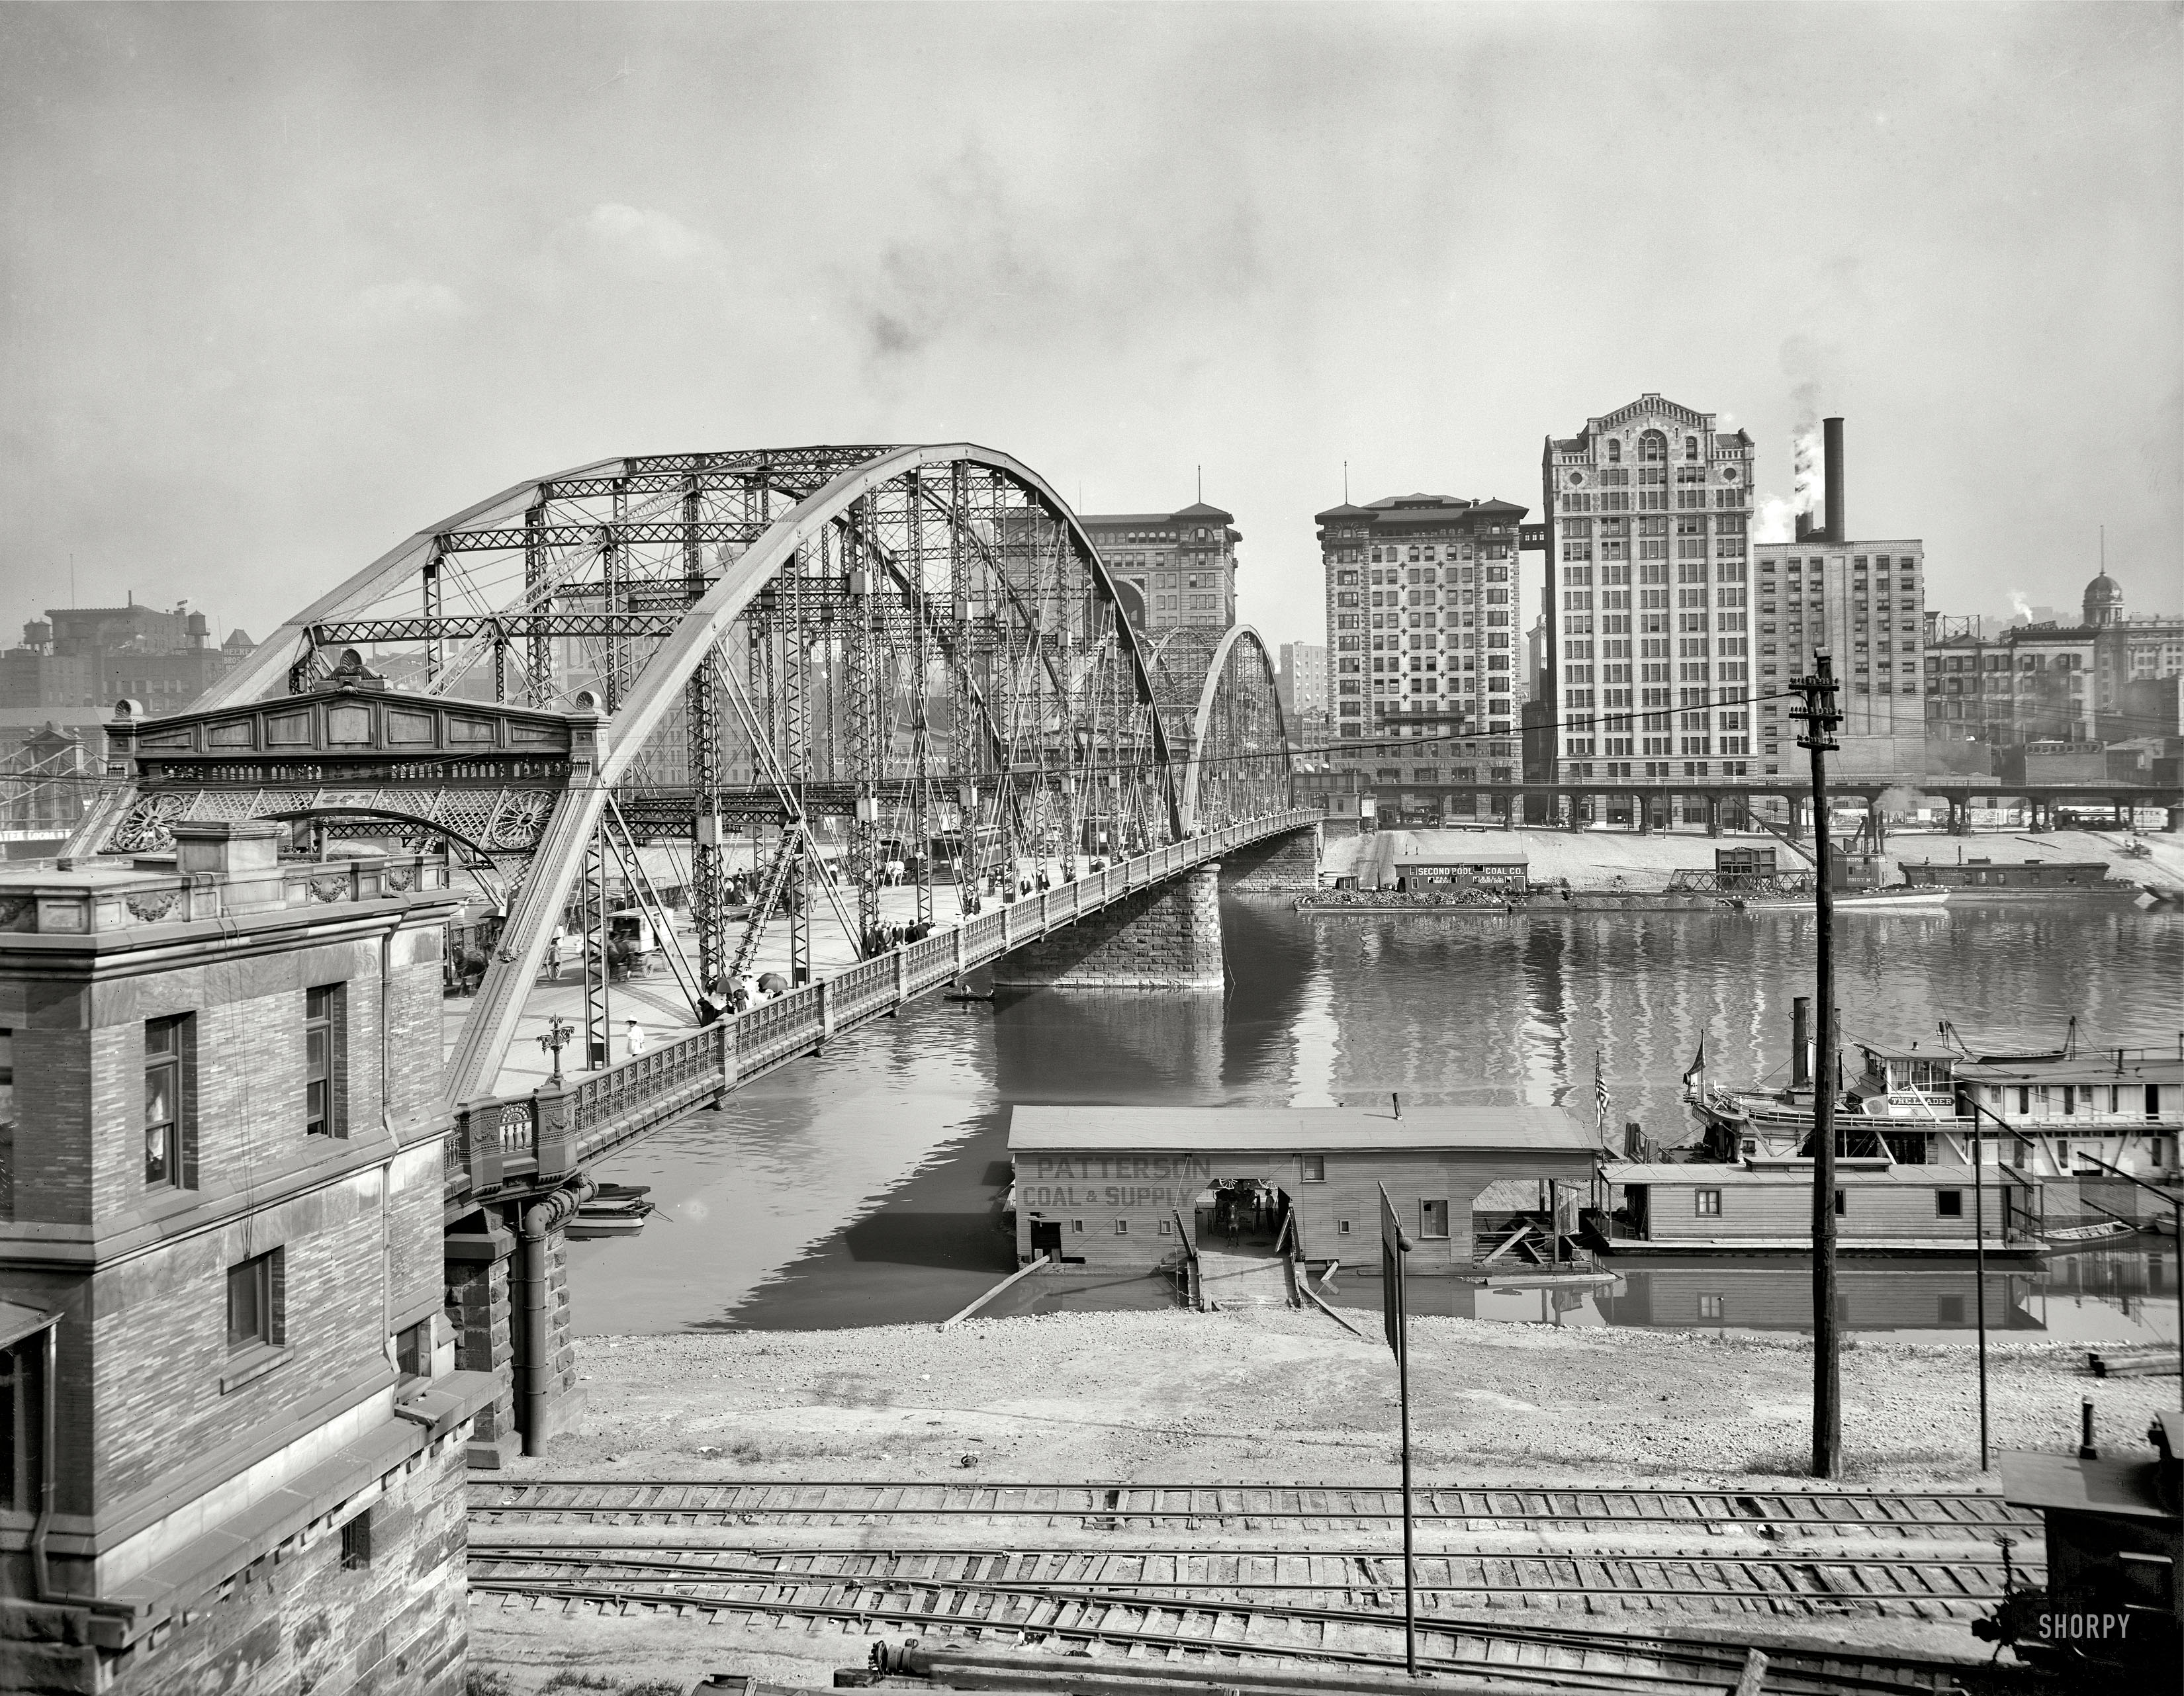 Pittsburgh, Pennsylvania, circa 1910. "Sixth Street Bridge over Allegheny River." In 1927 this span was moved 12 miles to a crossing over the Ohio River, where it spent the remainder of its long life as the Coraopolis Bridge. View full size.